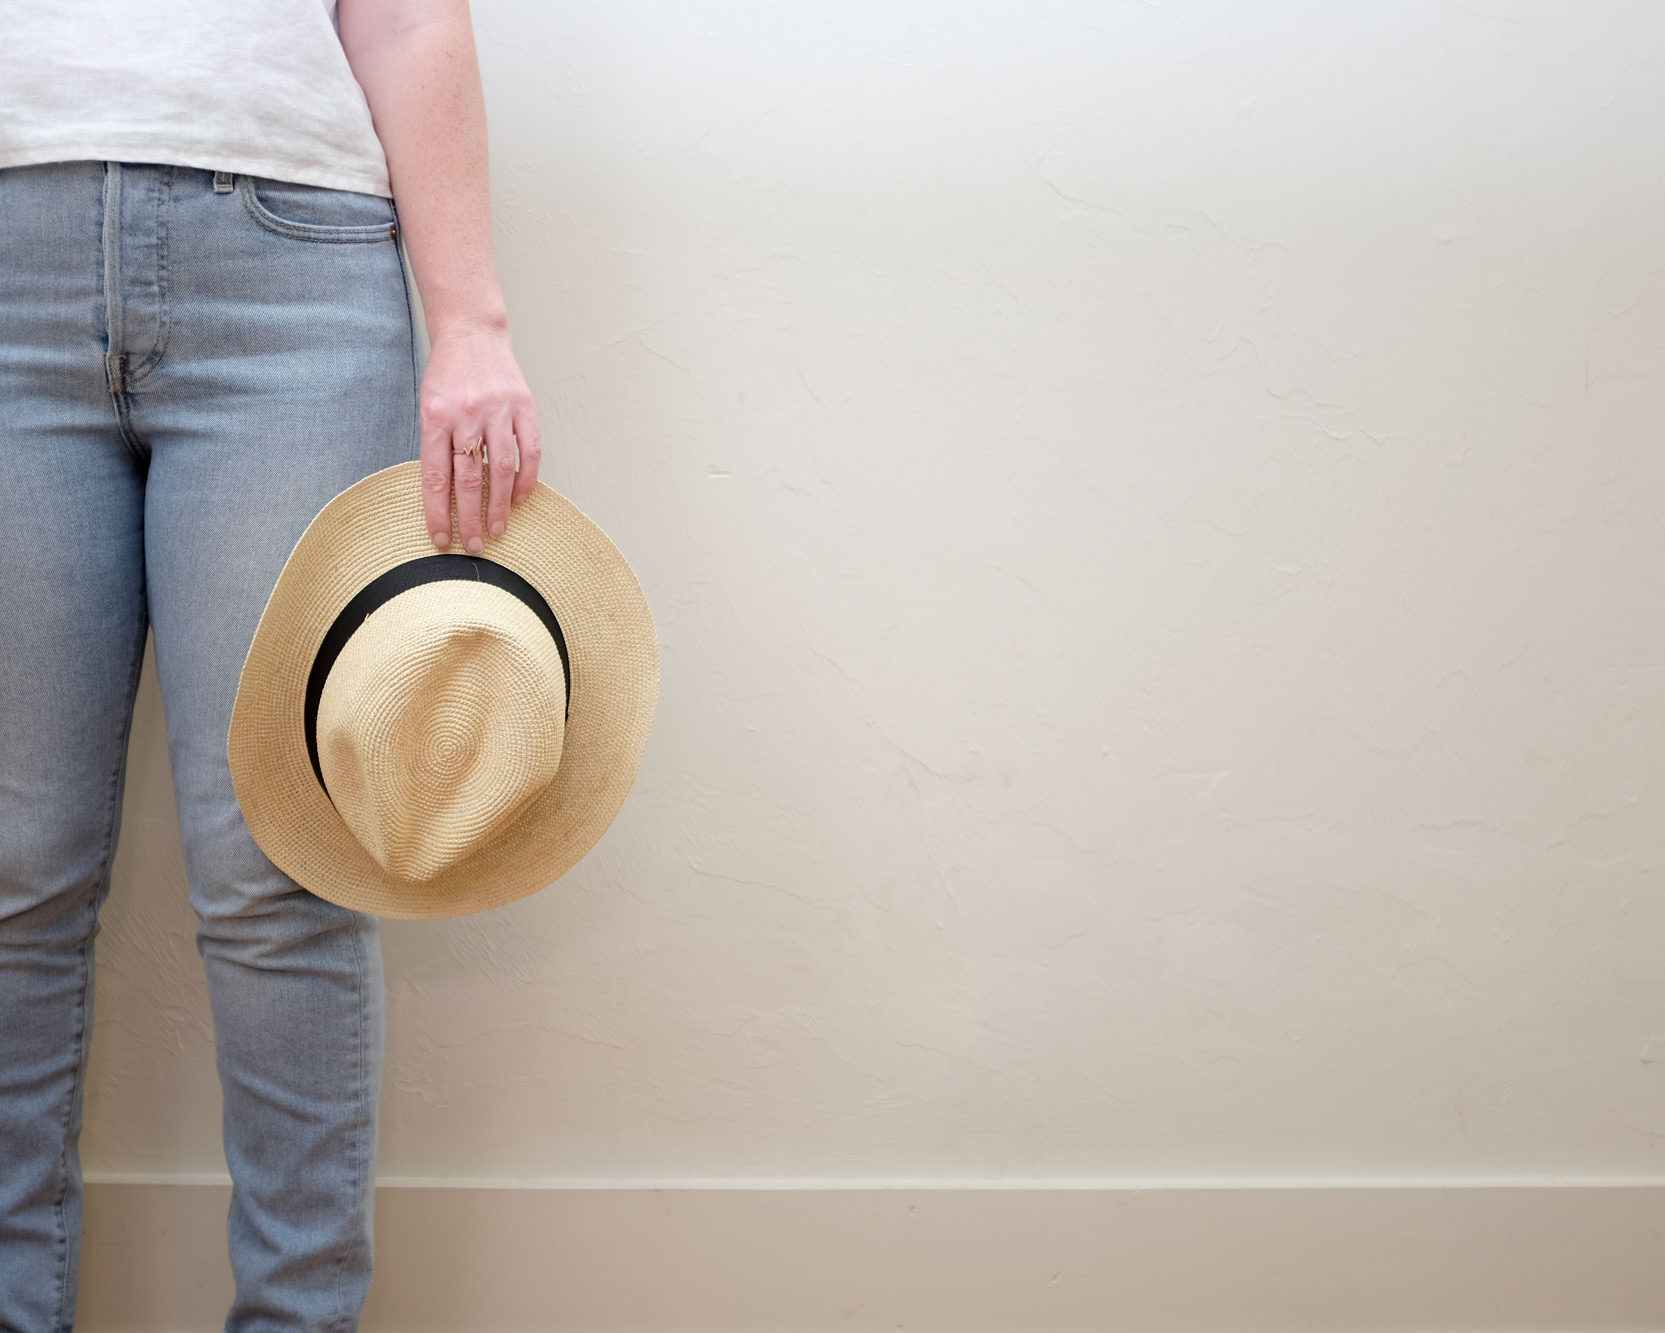 Krystal is wearing a white linen tee and light blue jeans and is holding a straw hat. The image is closely cropped on her hand and legs.